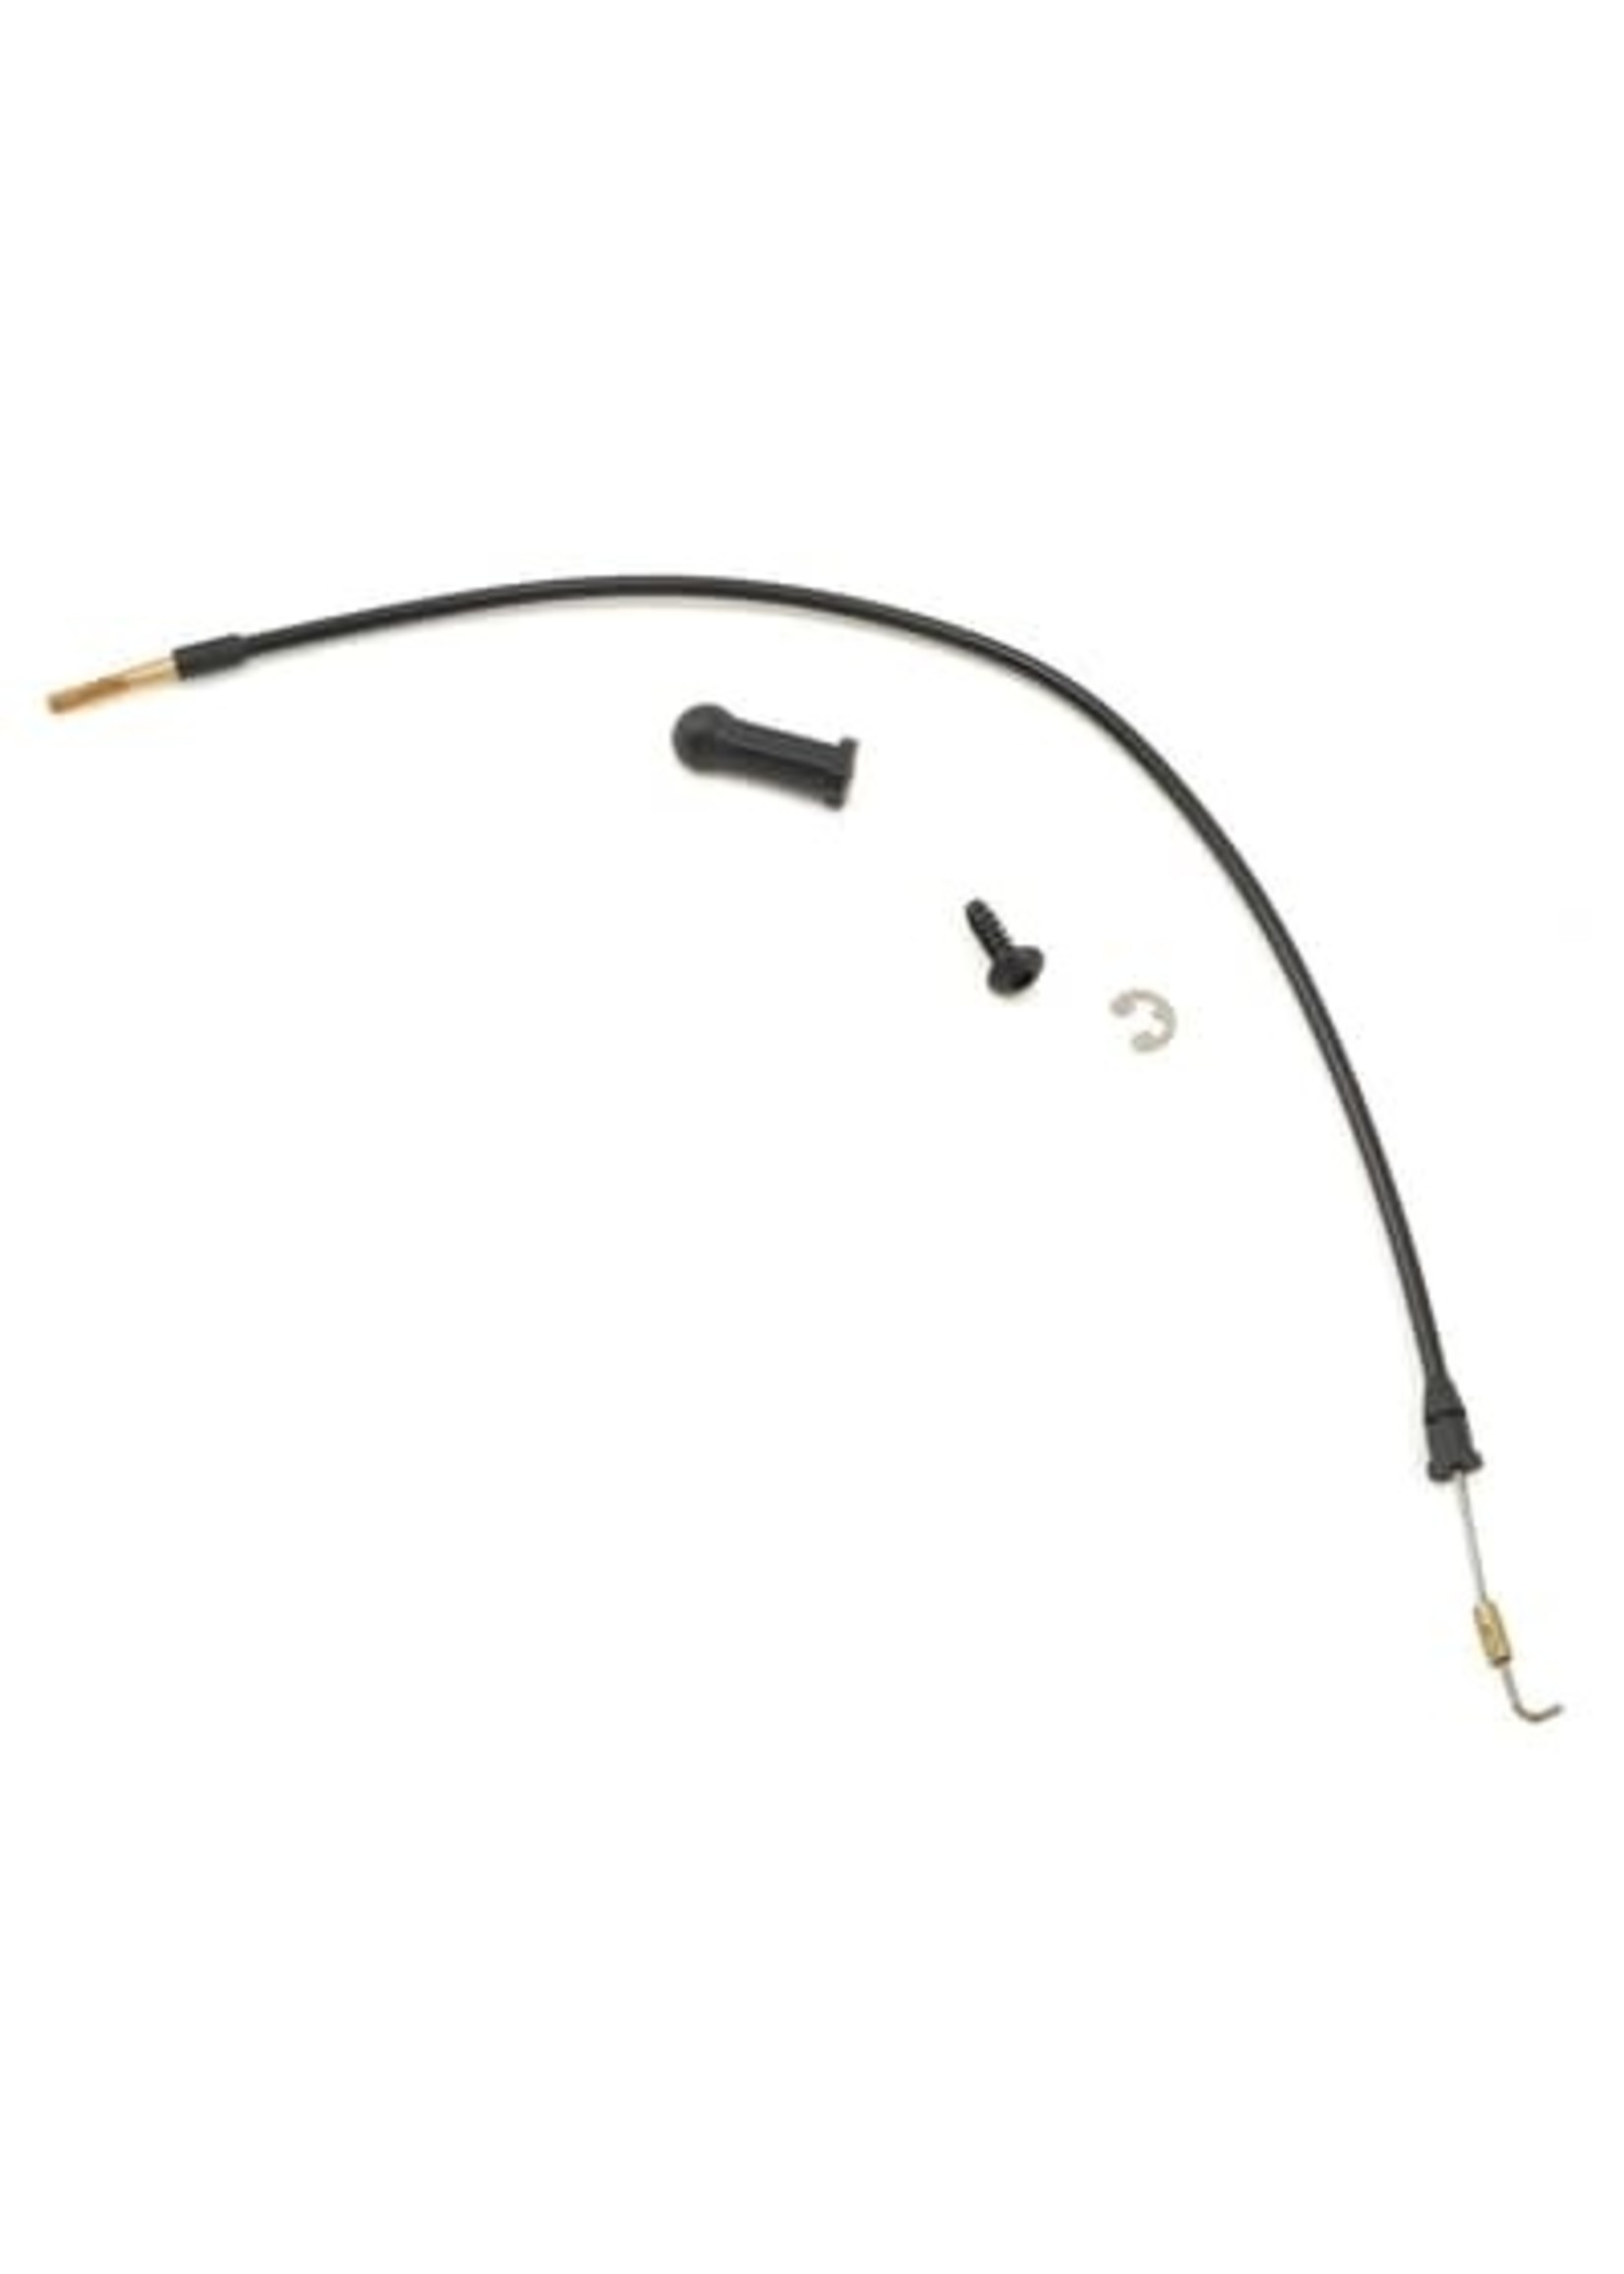 Traxxas 8284 Cable, T-lock (rear)